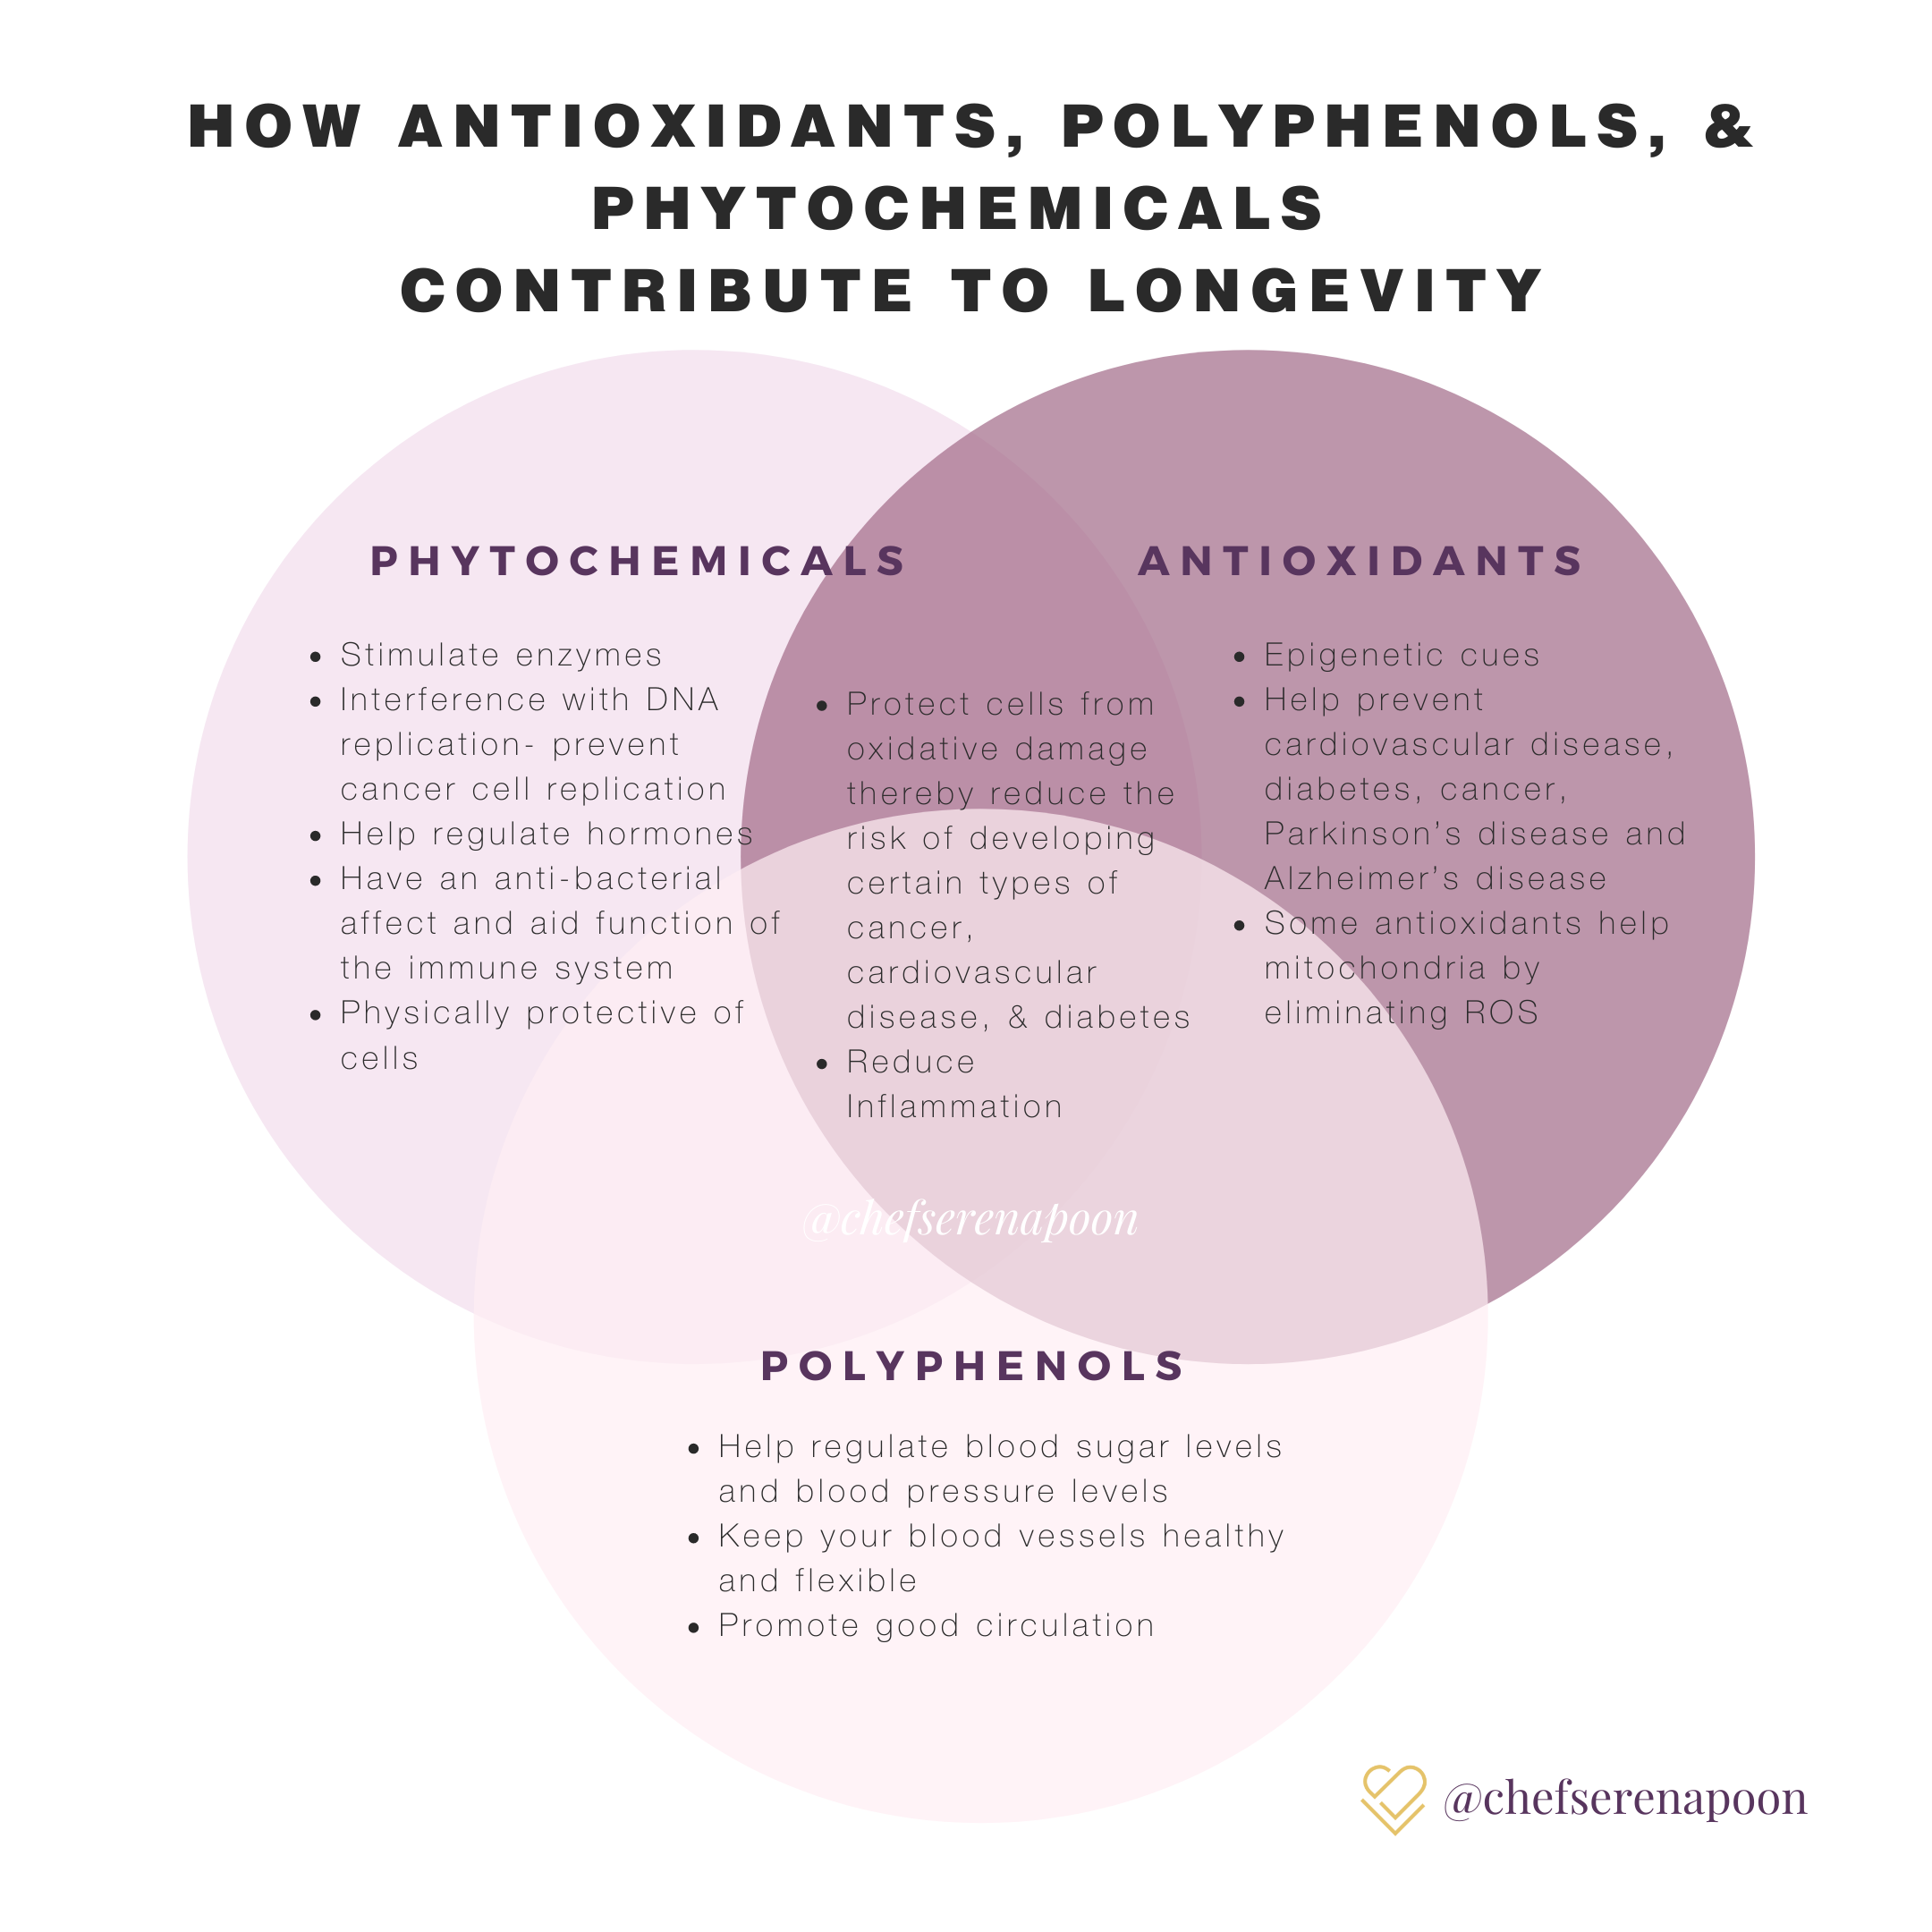 Antioxidants, Polyphenols, and Phytochemicals